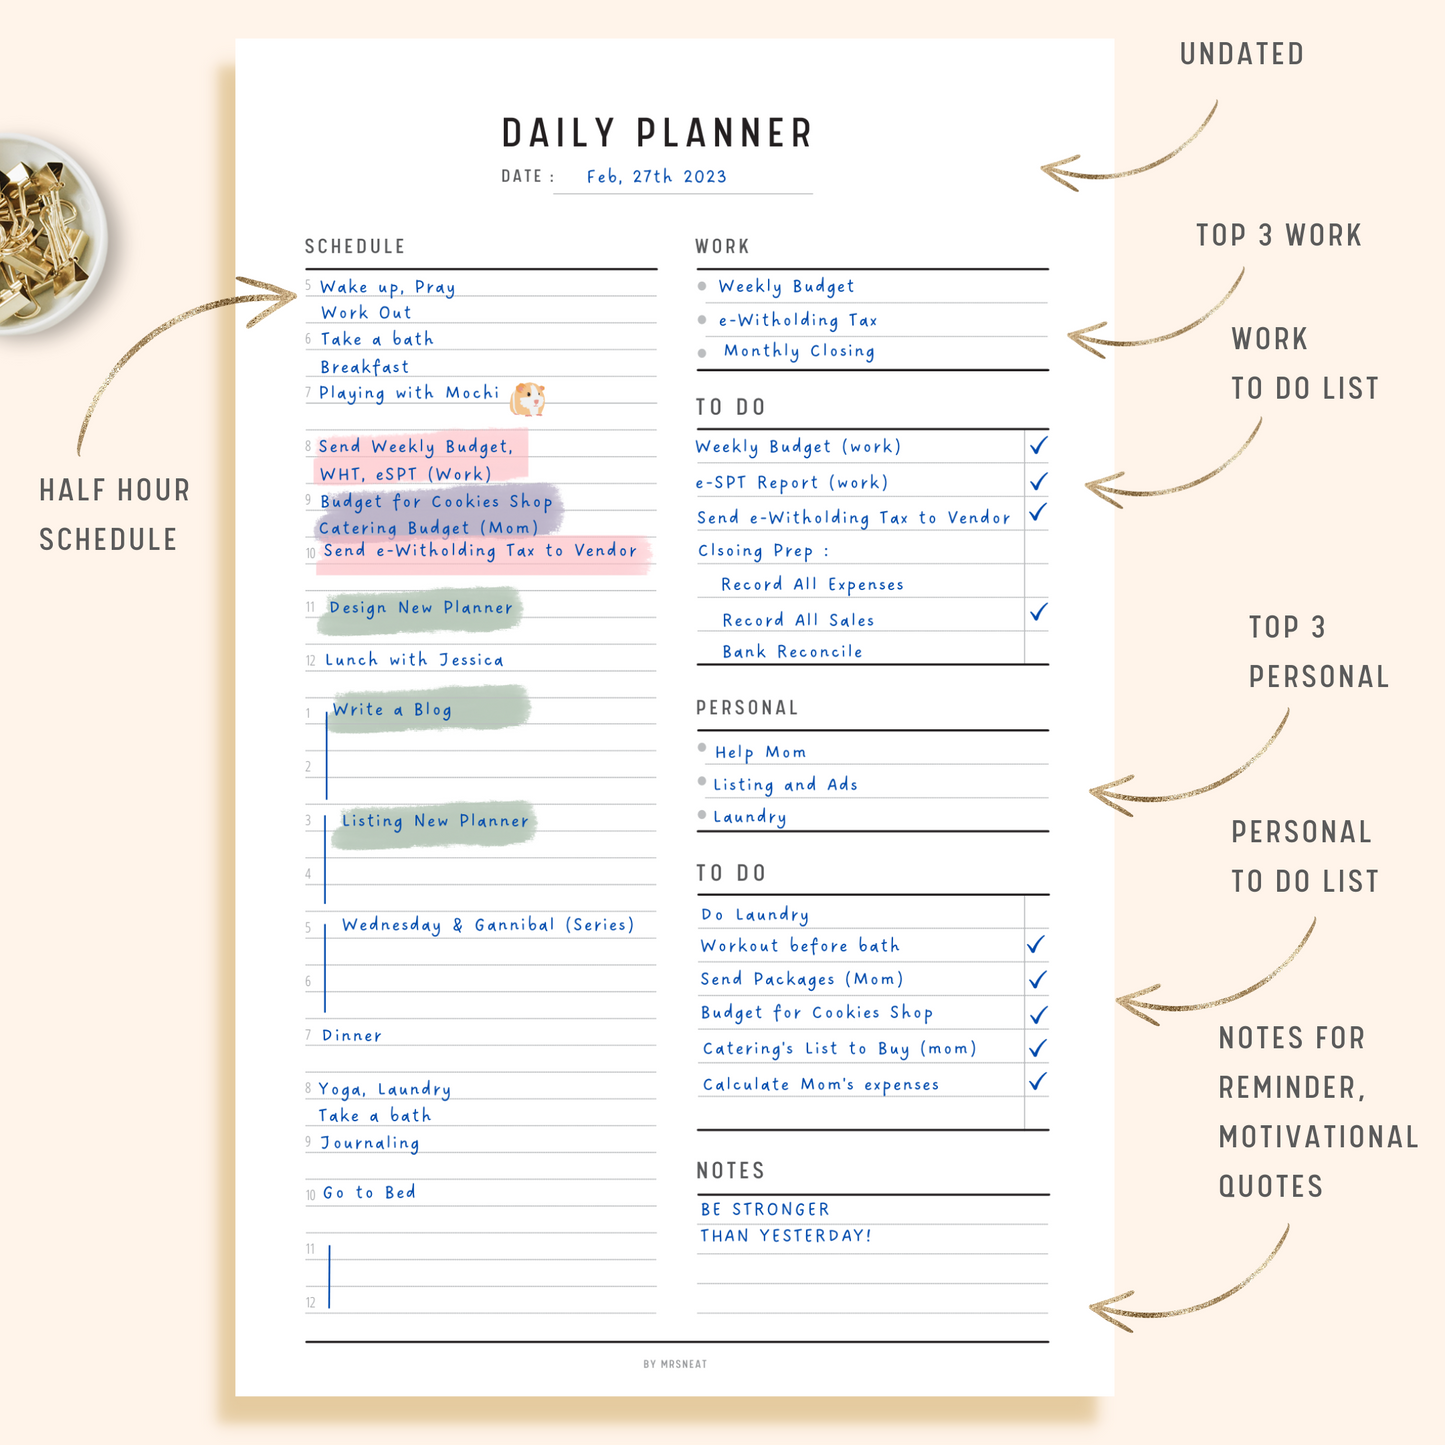 Remote Work Daily Planner Printable with room for Half Hour Schedule, Goal for Work and Personal